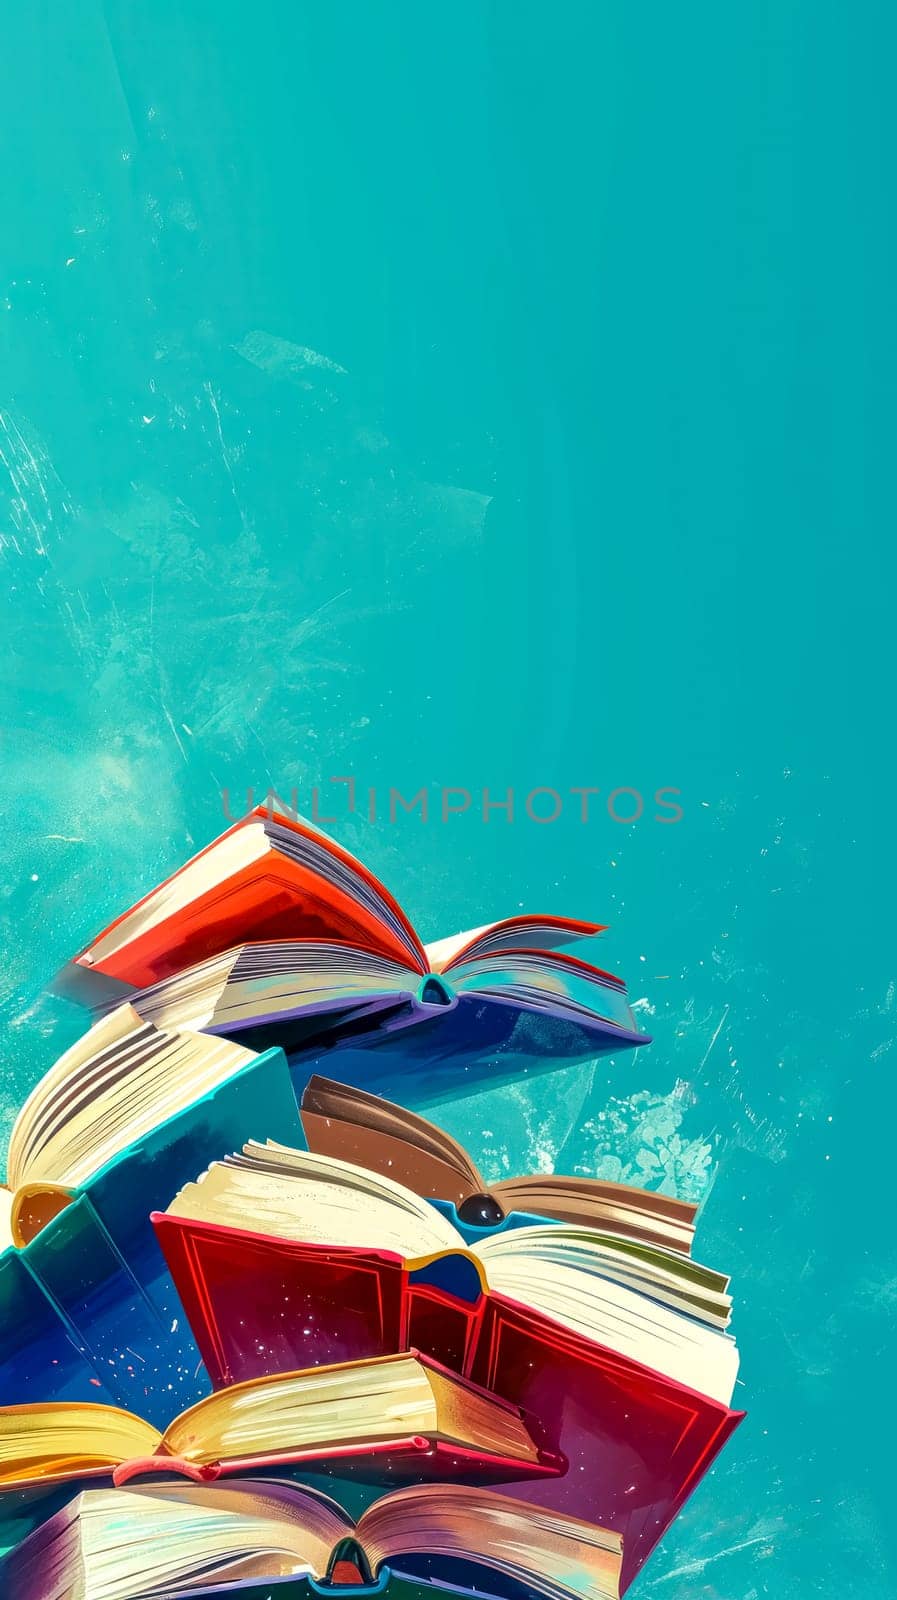 colorful array of open books with pages fanned out, set against a vibrant turquoise backdrop, suggesting a world of imagination and knowledge, vertical banner with copy space